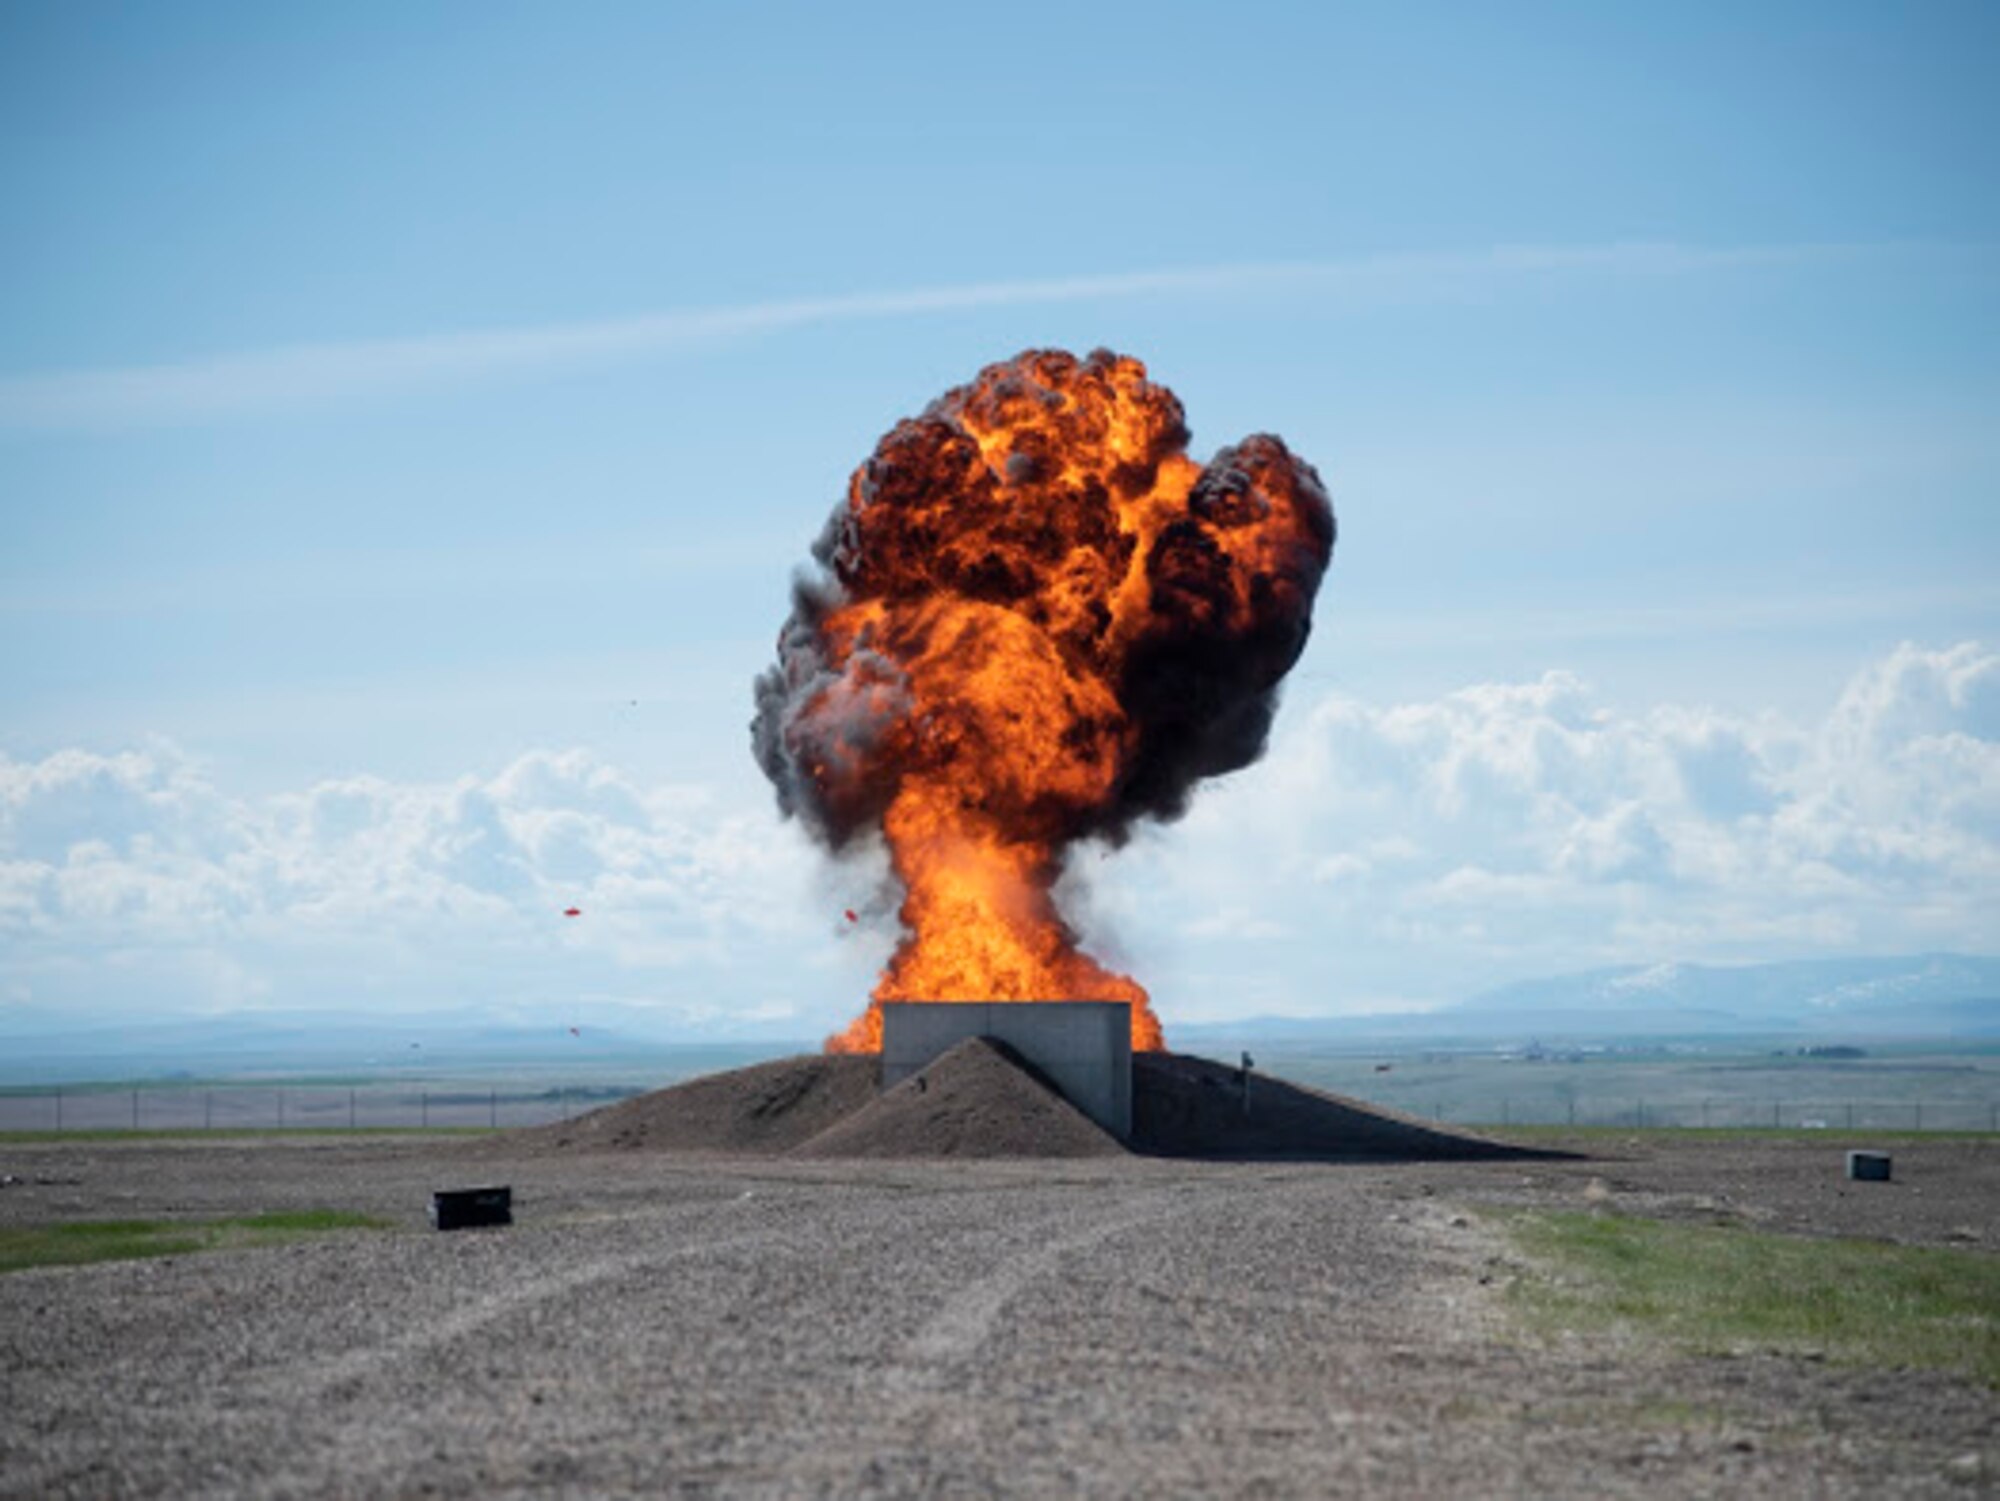 A fireball rises into the air during a training demonstration by the 341st Civil Engineer Squadron explosive ordnance disposal team May 14, 2021 at Malmstrom Air Force Base, Mont.